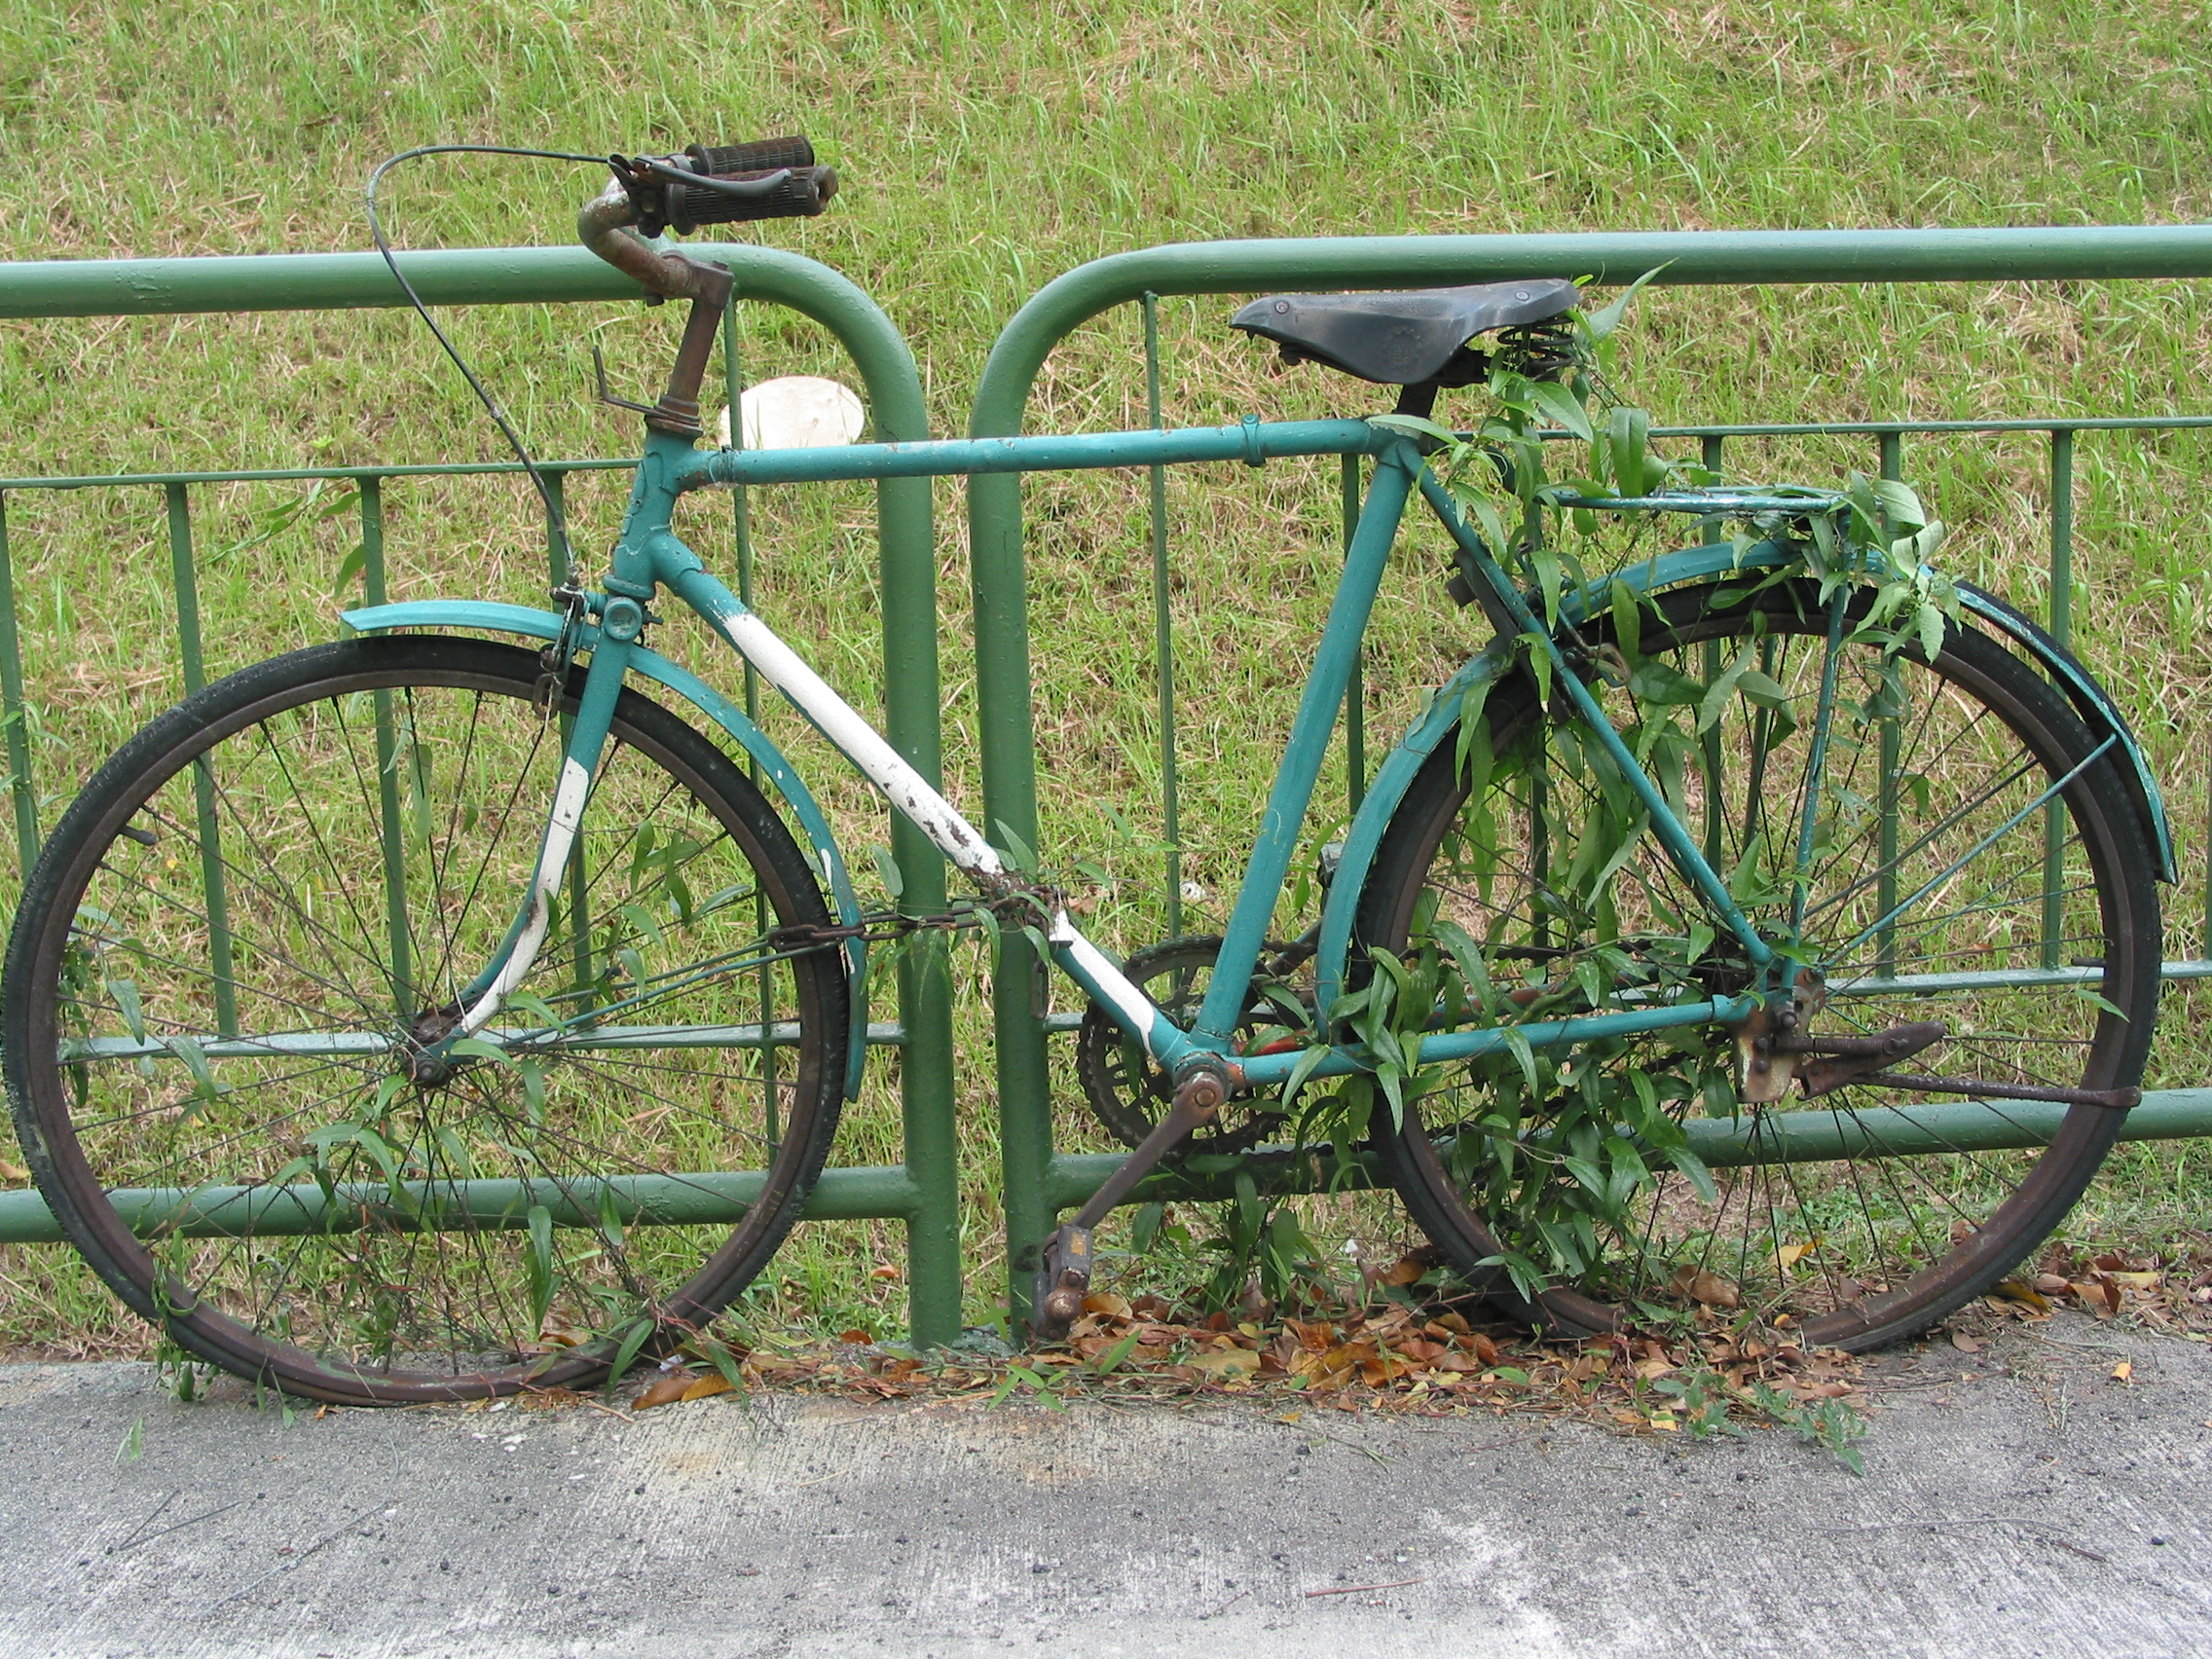 bicycles really evolved from plants